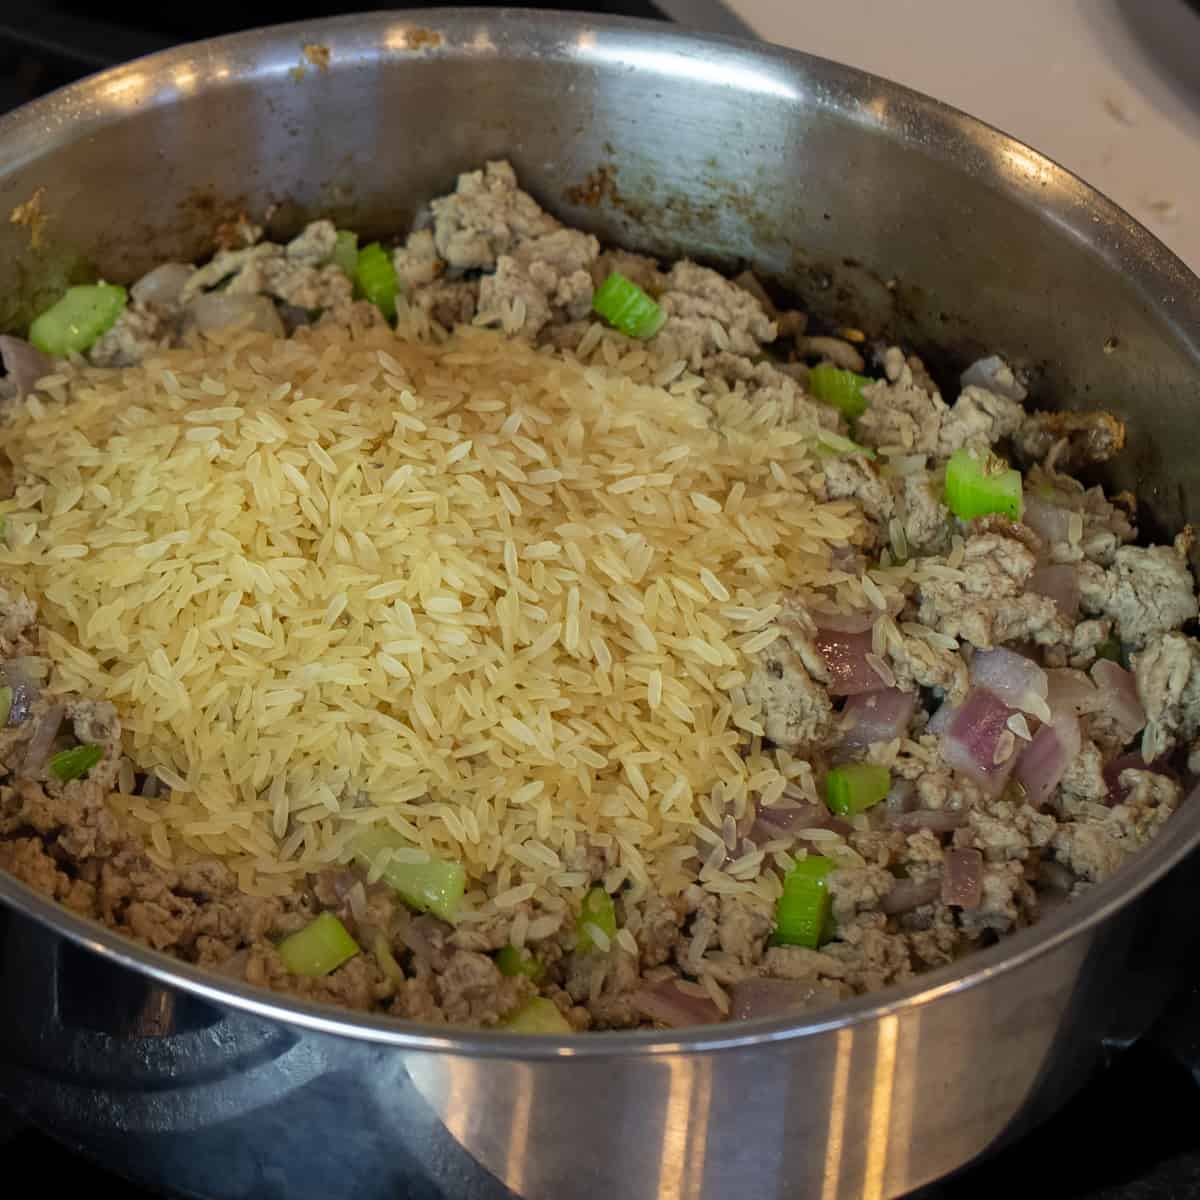 Raw rice added to a skillet with cooked turkey.